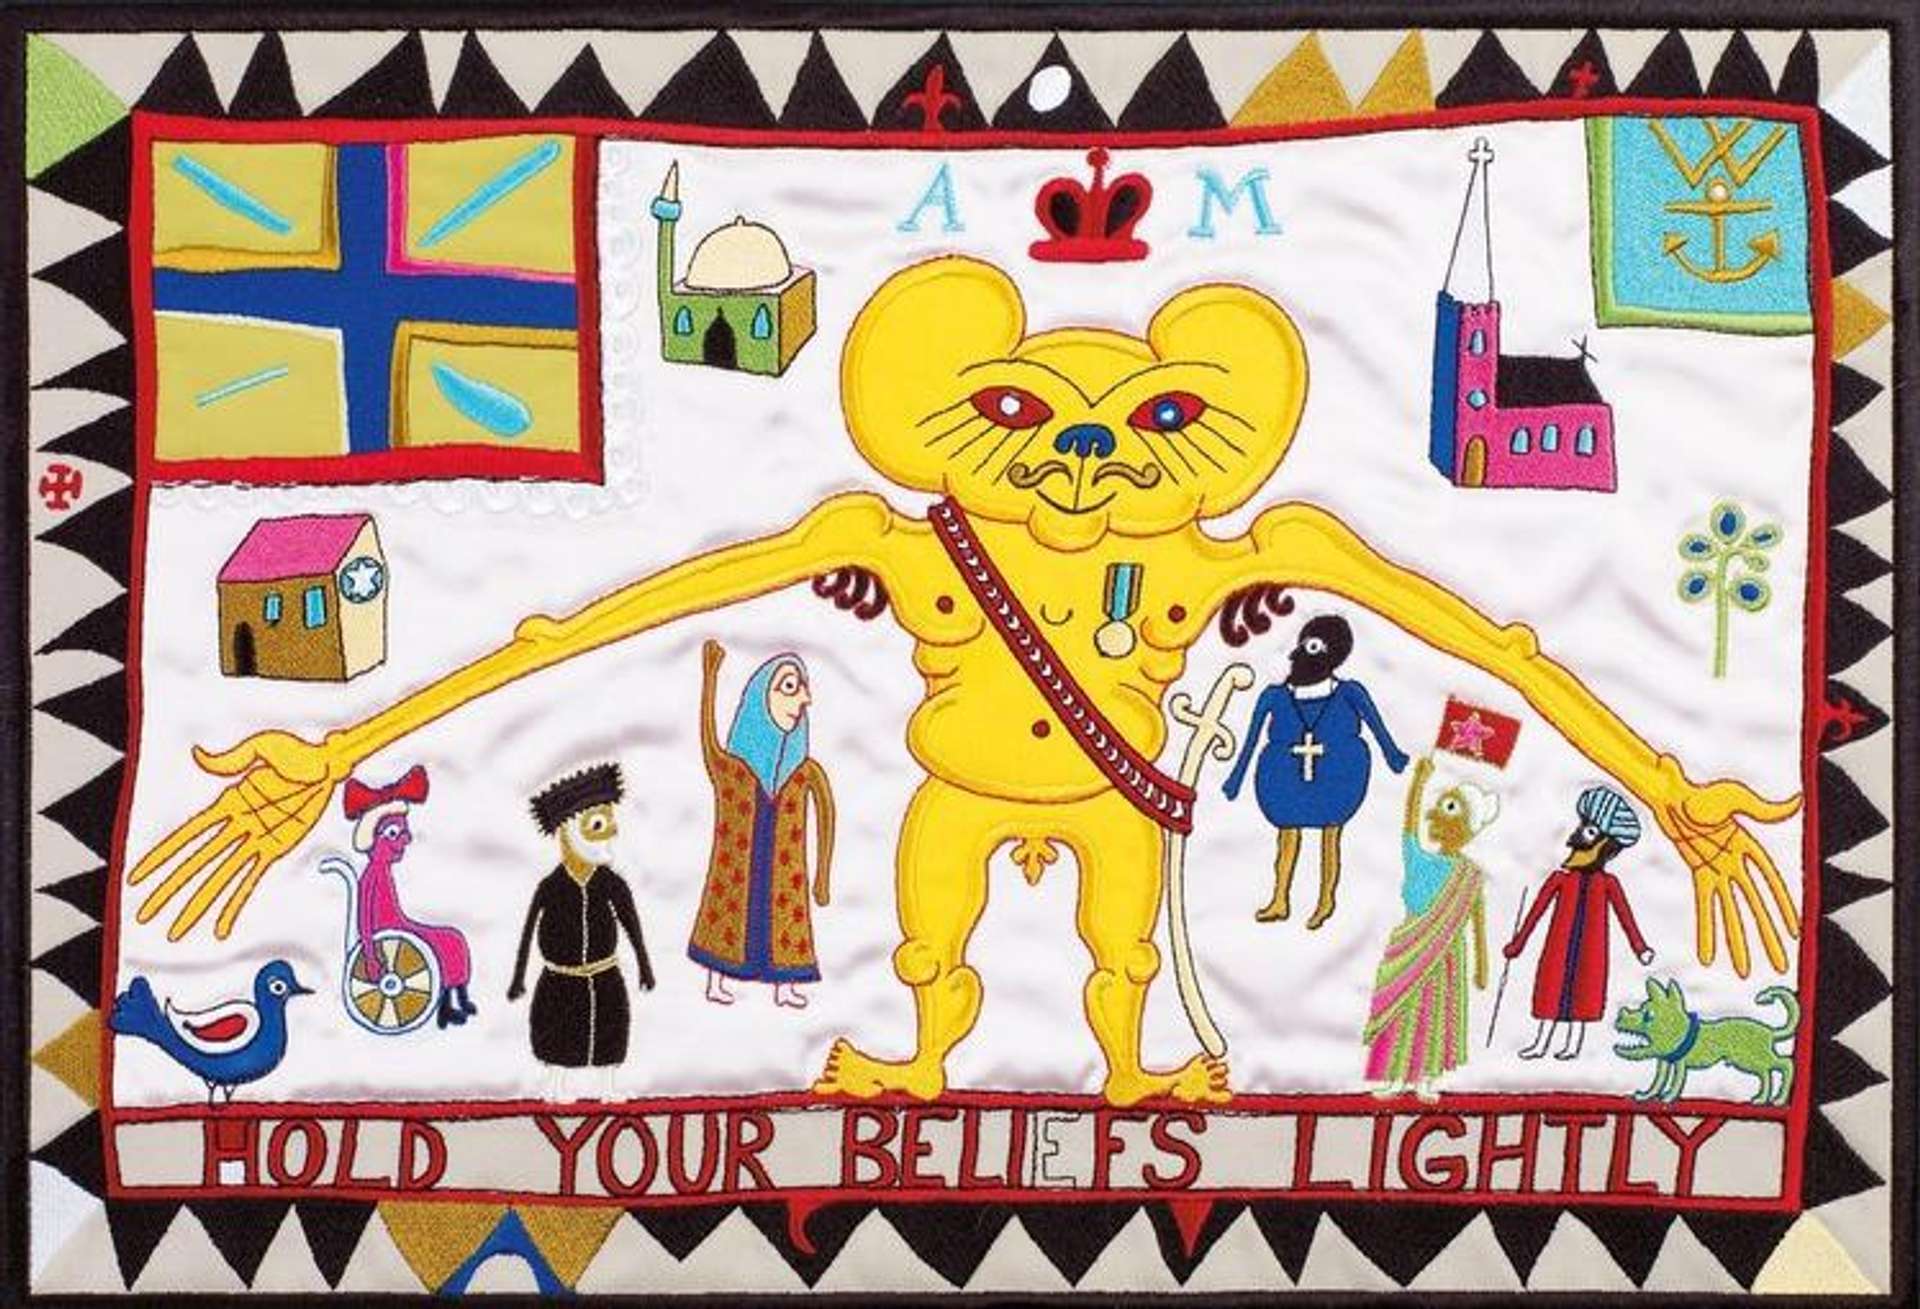 Hold Your Beliefs Lightly - Embroidery by Grayson Perry 2011 - MyArtBroker